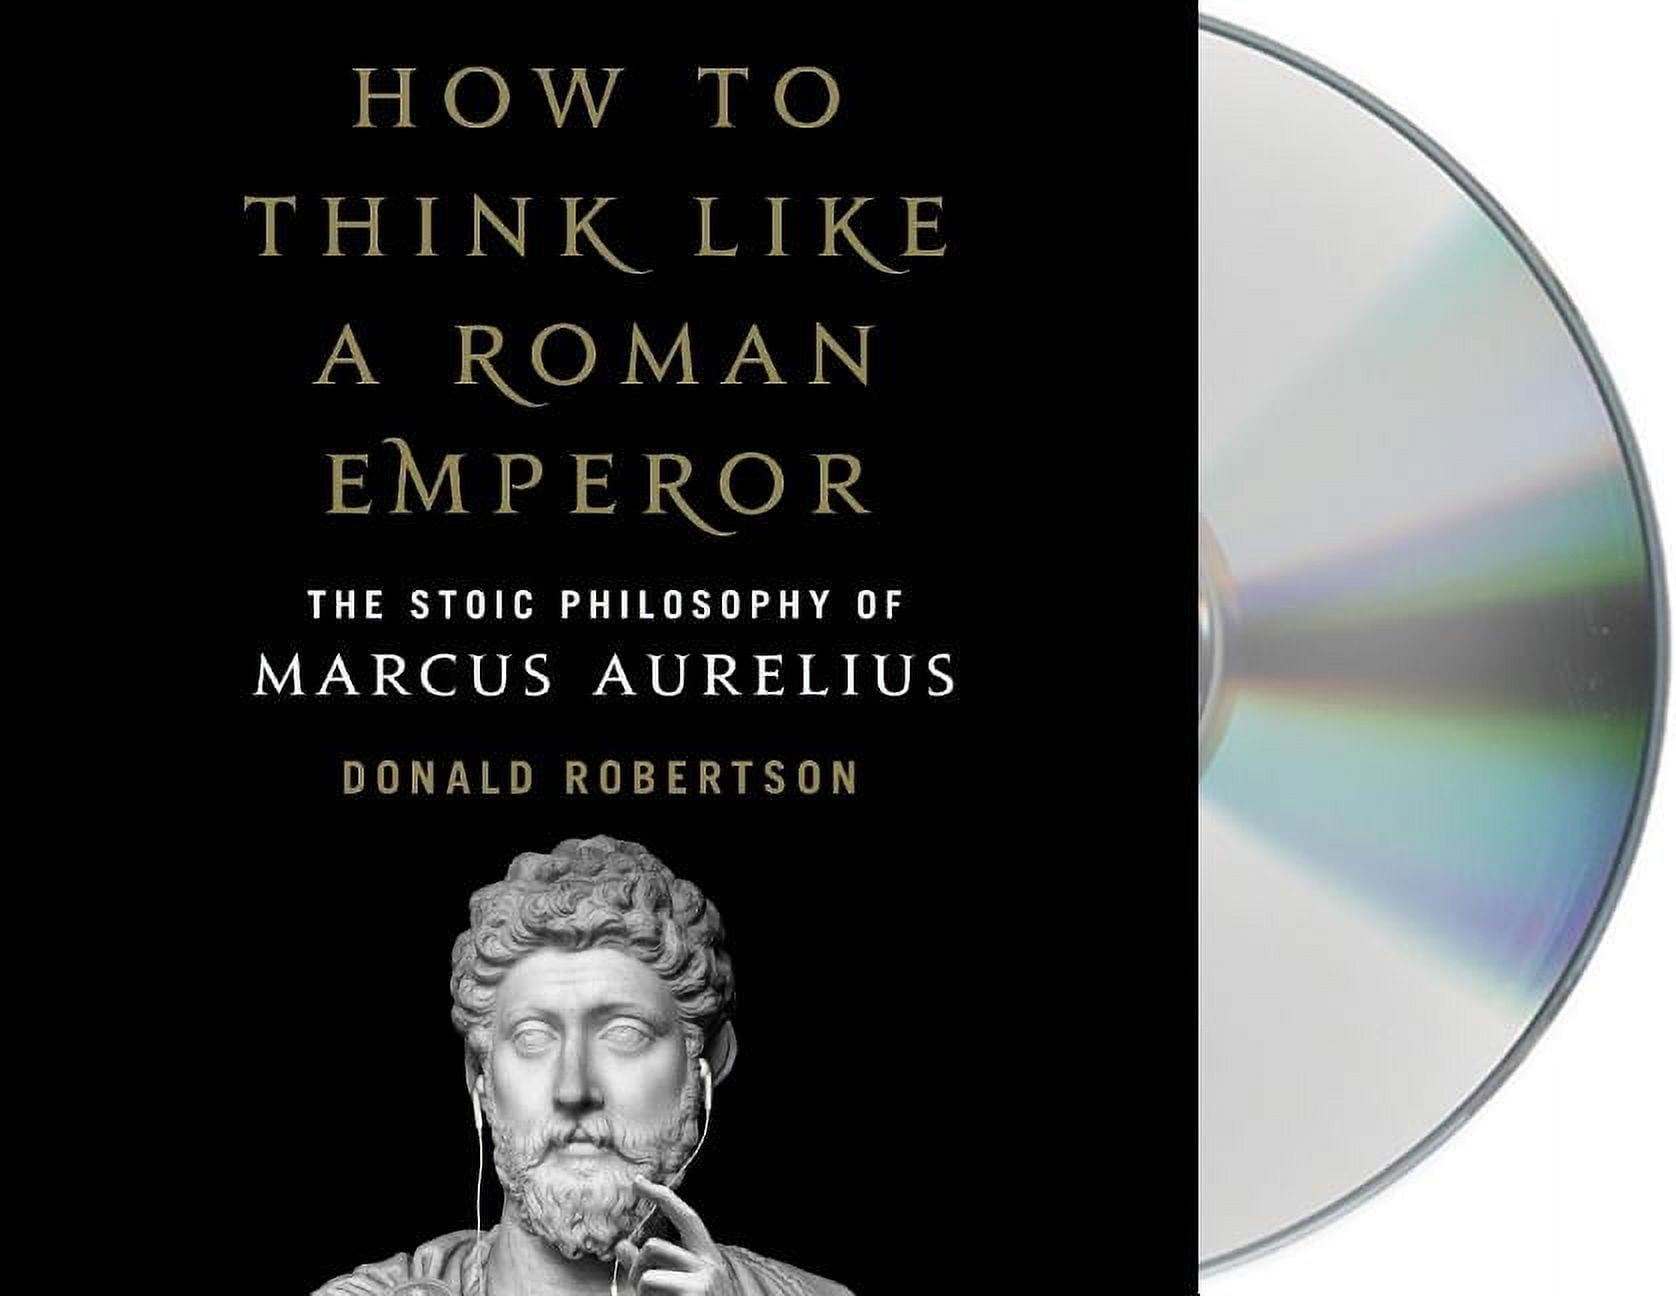 How to Think Like a Roman Emperor : The Stoic Philosophy of Marcus